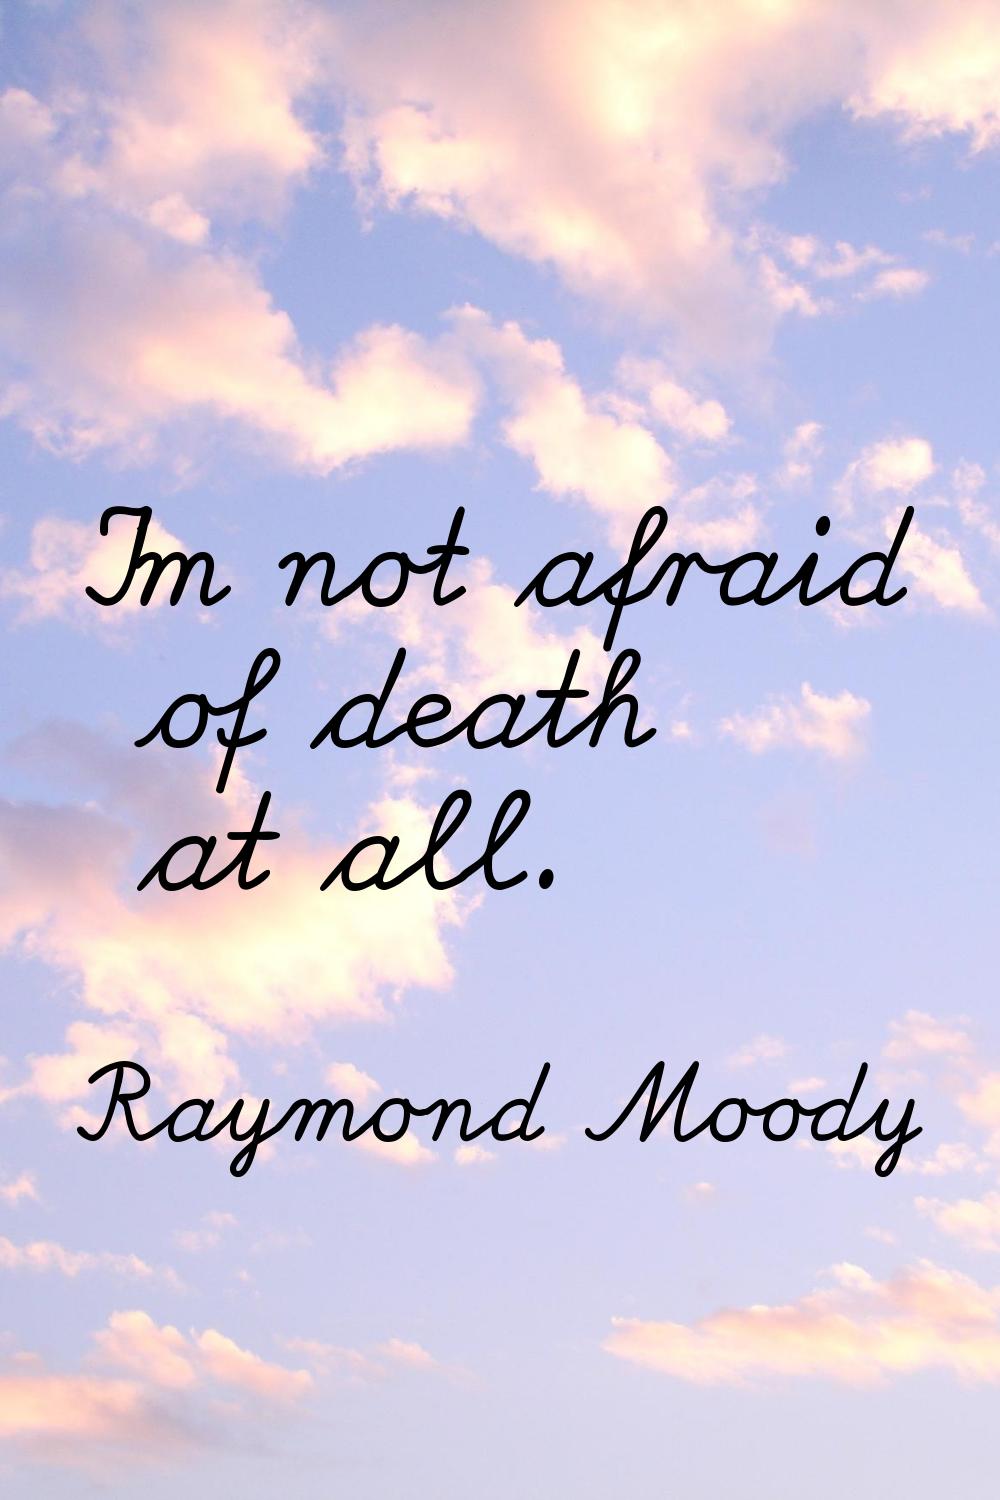 I'm not afraid of death at all.